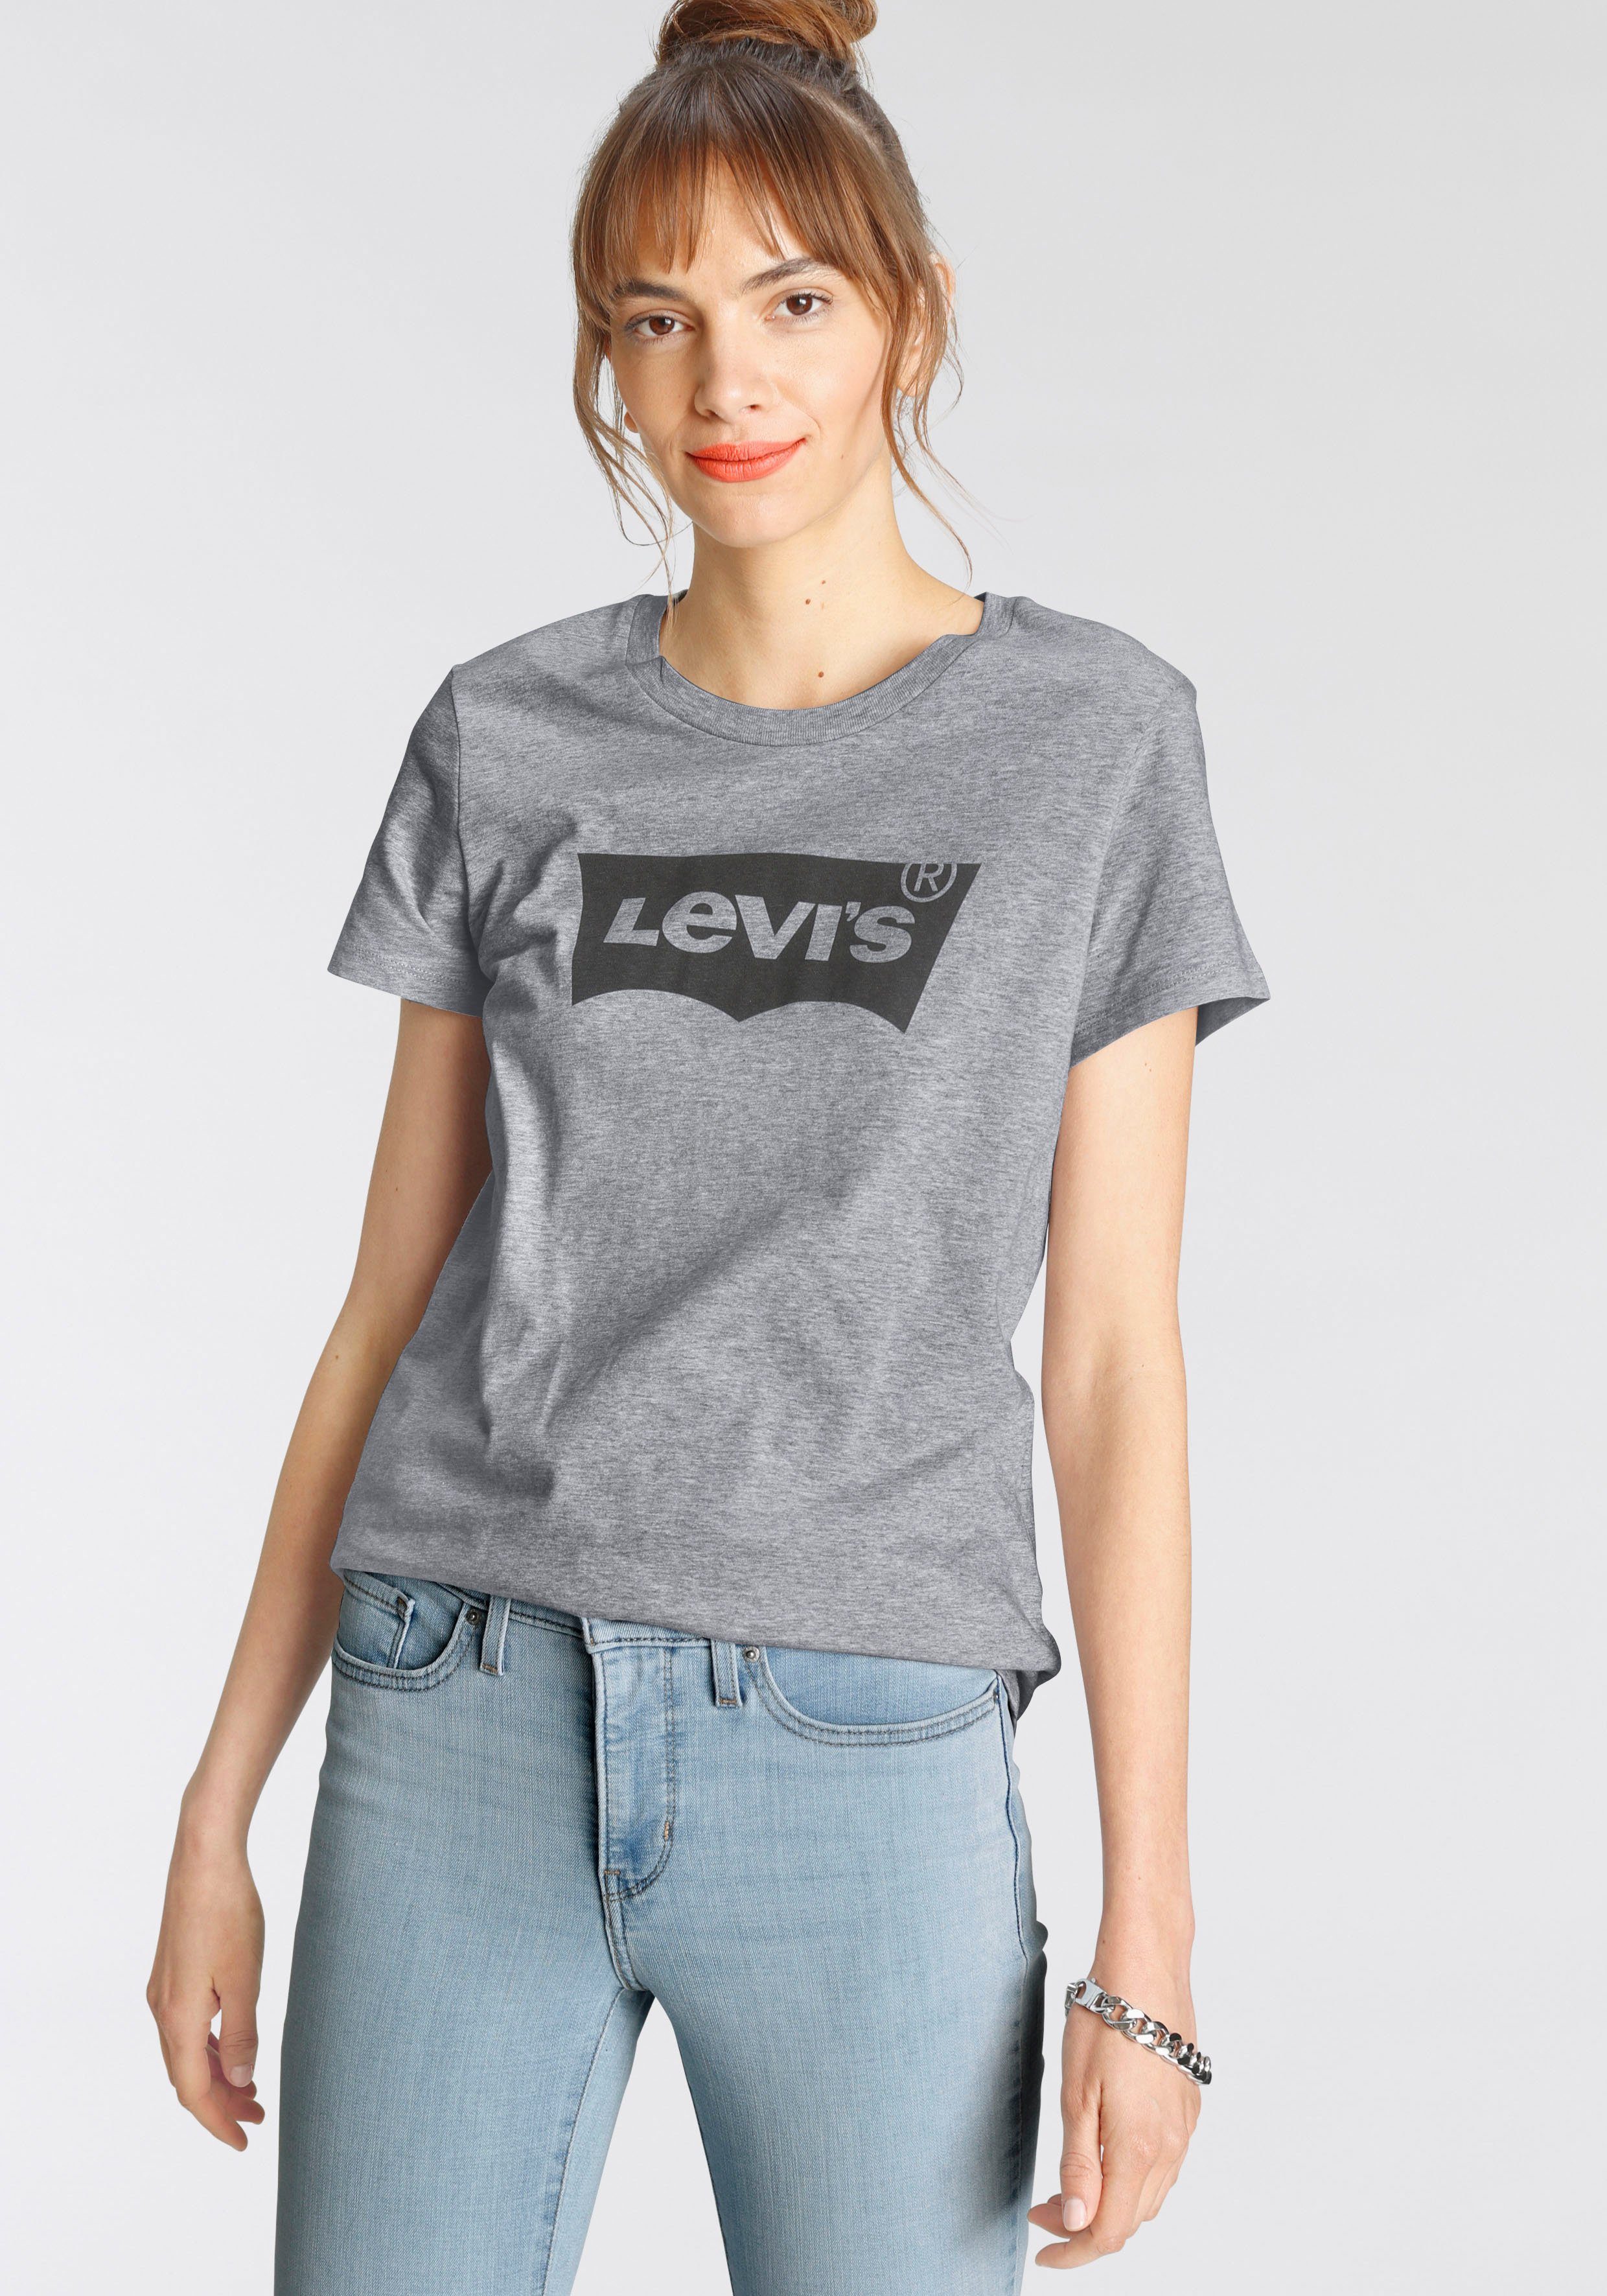 Guinness rijst Rentmeester Levi's® T-shirt The Perfect Tee met logoprint online shop | OTTO